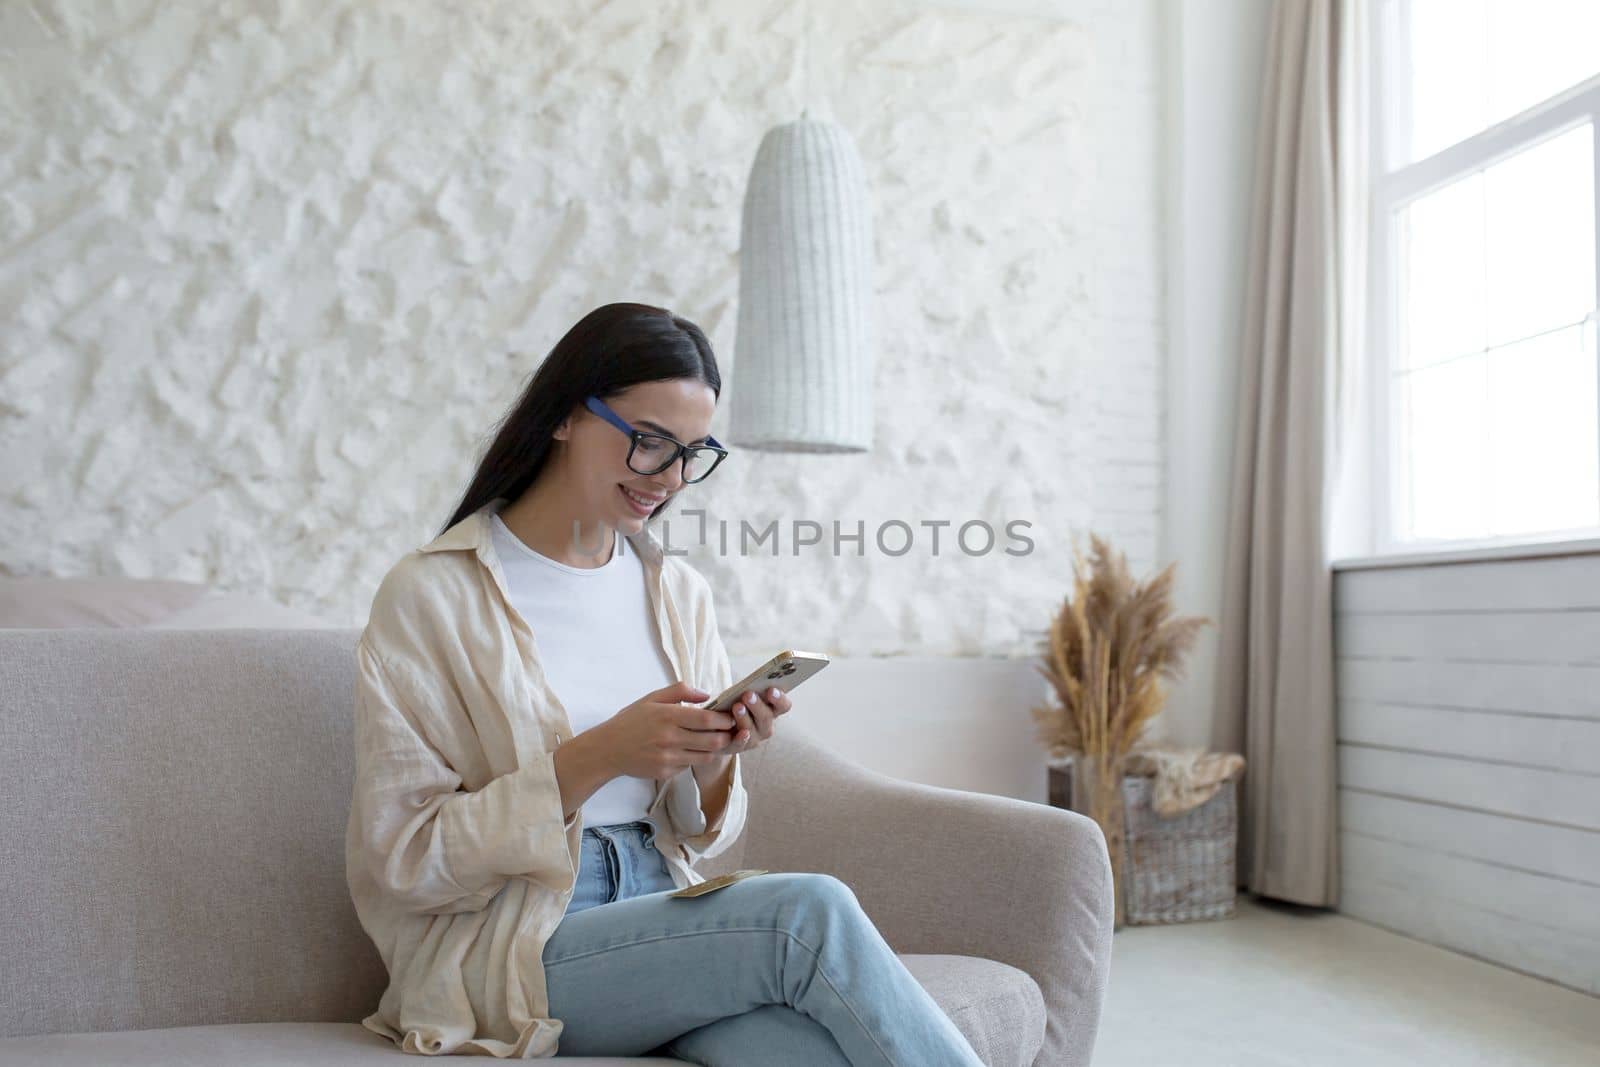 A young beautiful woman in glasses sits on a sofa by the window and uses a mobile phone, dials, texts, reads the news, smiles.